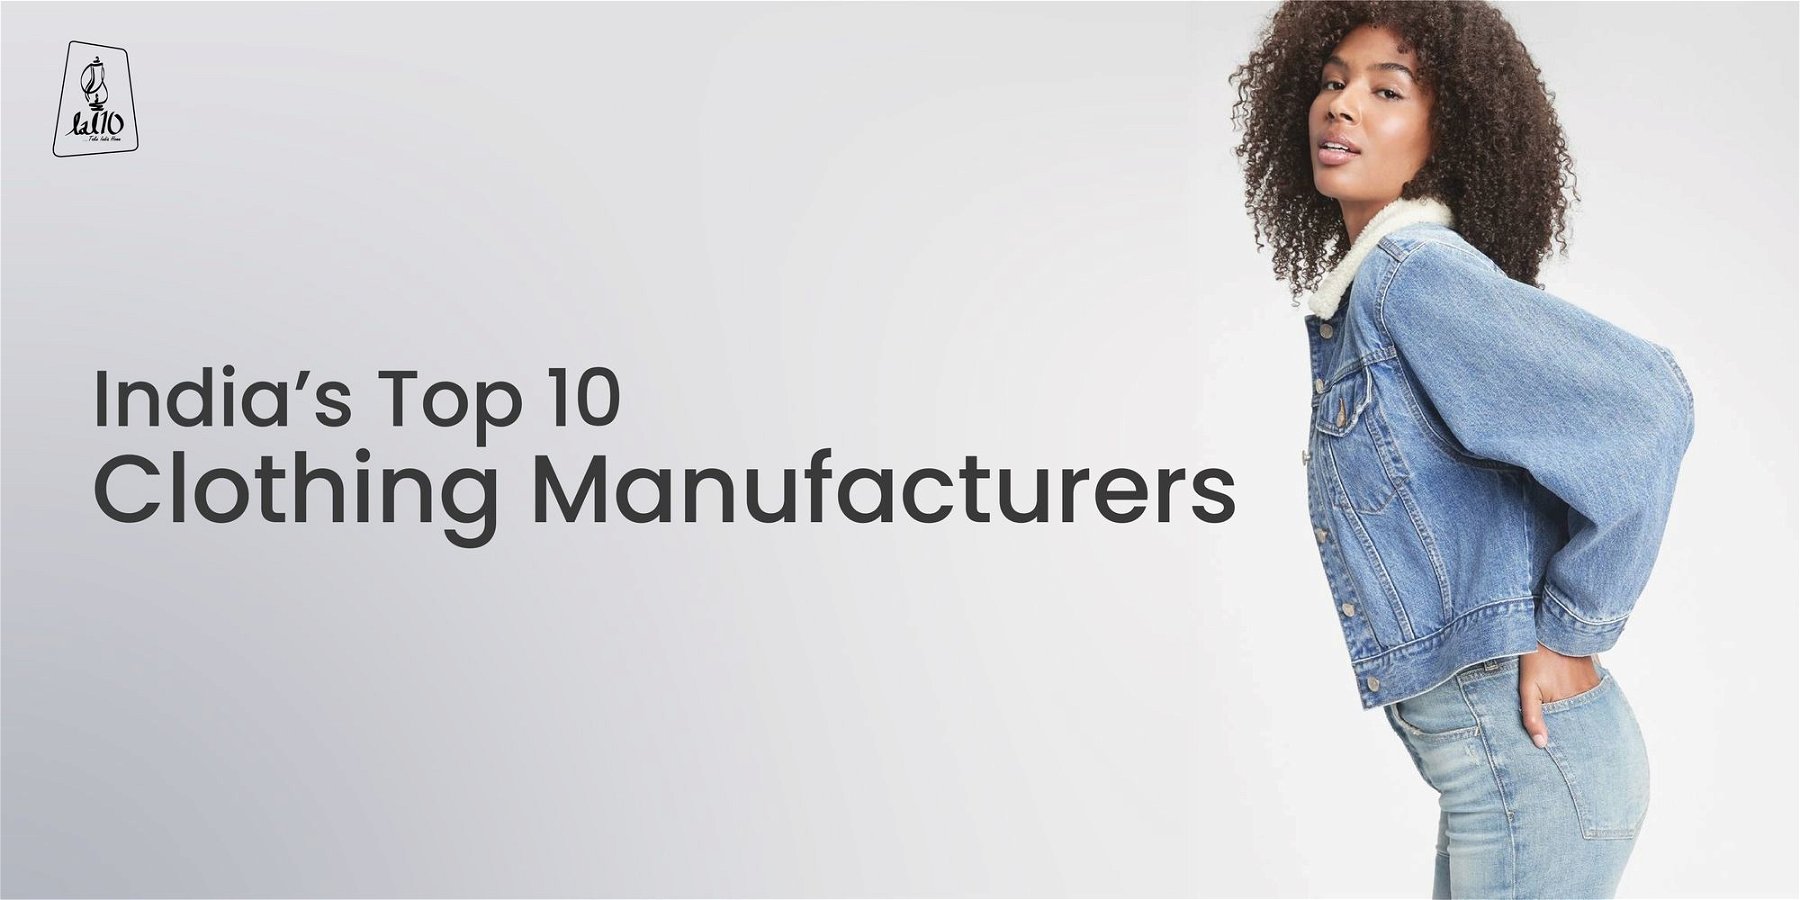 Top 10 Clothing Manufacturing Brands in the International Market